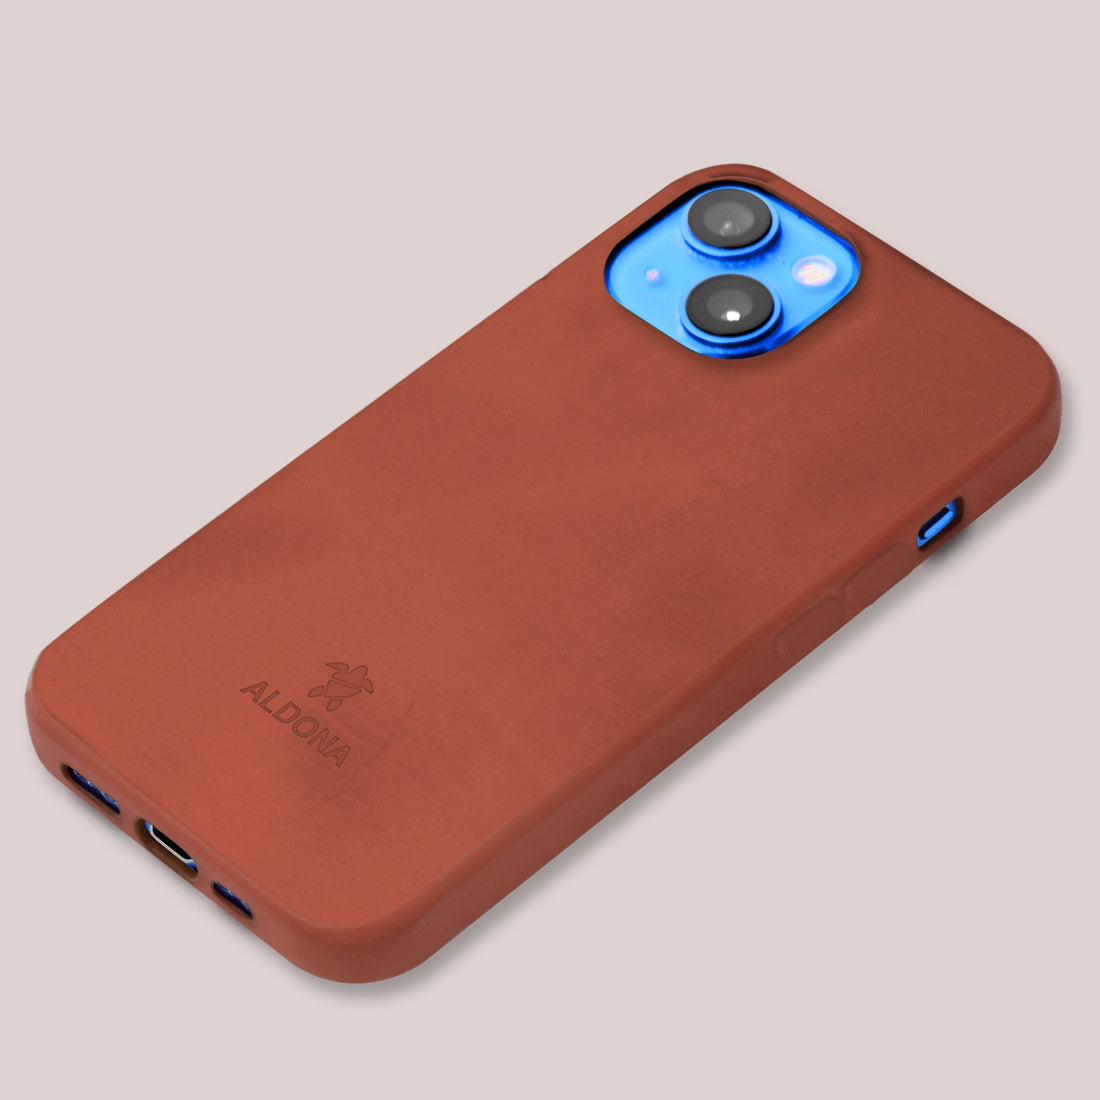 Kalon Case for iPhone 12 with MagSafe Compatibility - Burnt Tobacco